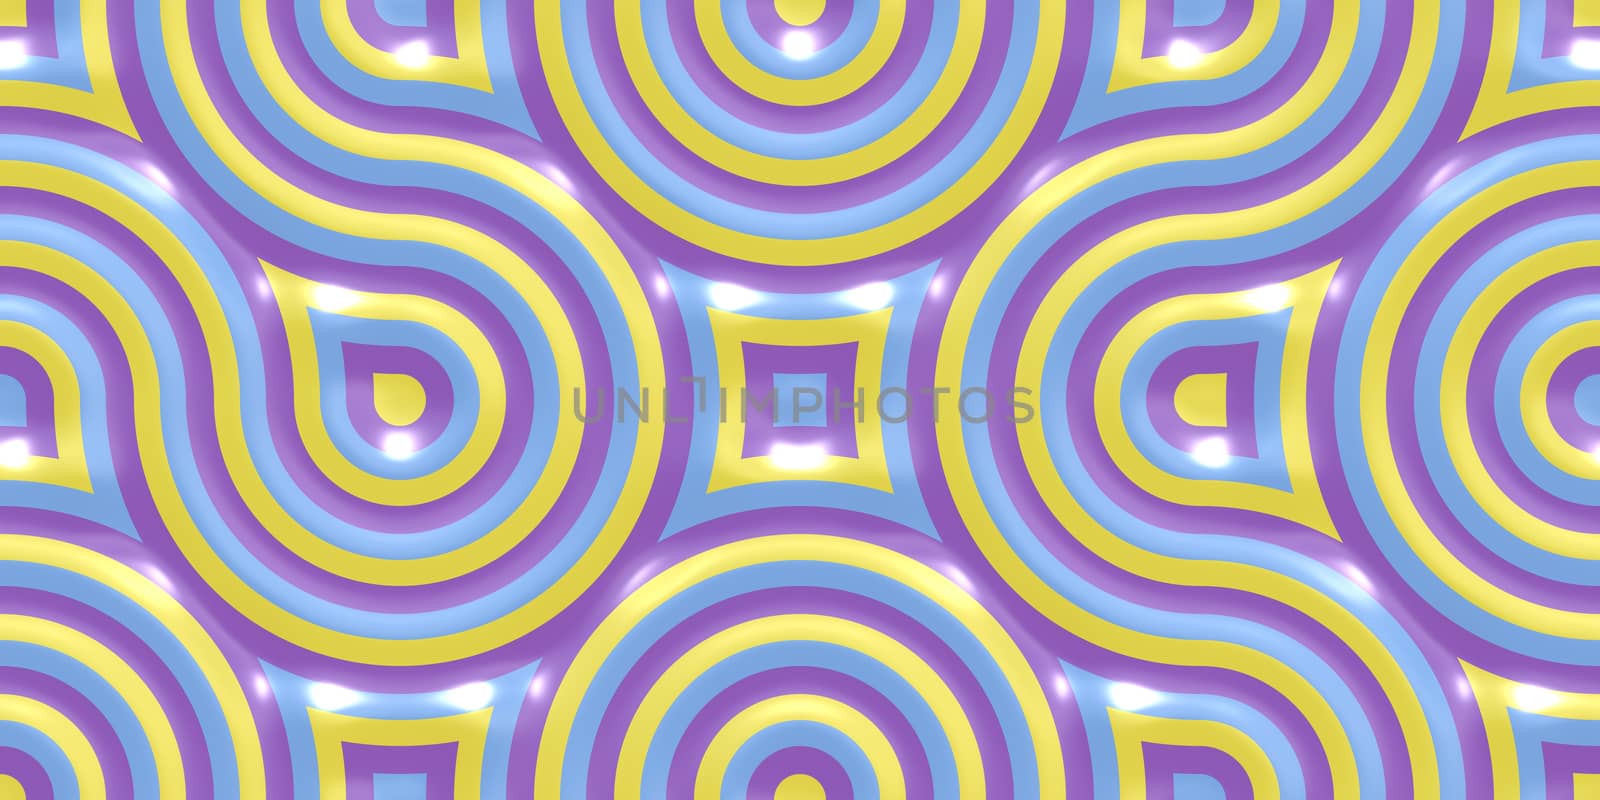 Yellow Lilac Violet Seamless Truchet Tilling Background. Geometric Mosaic Connections Texture. Tile Circles Labyrinth Backdrop.